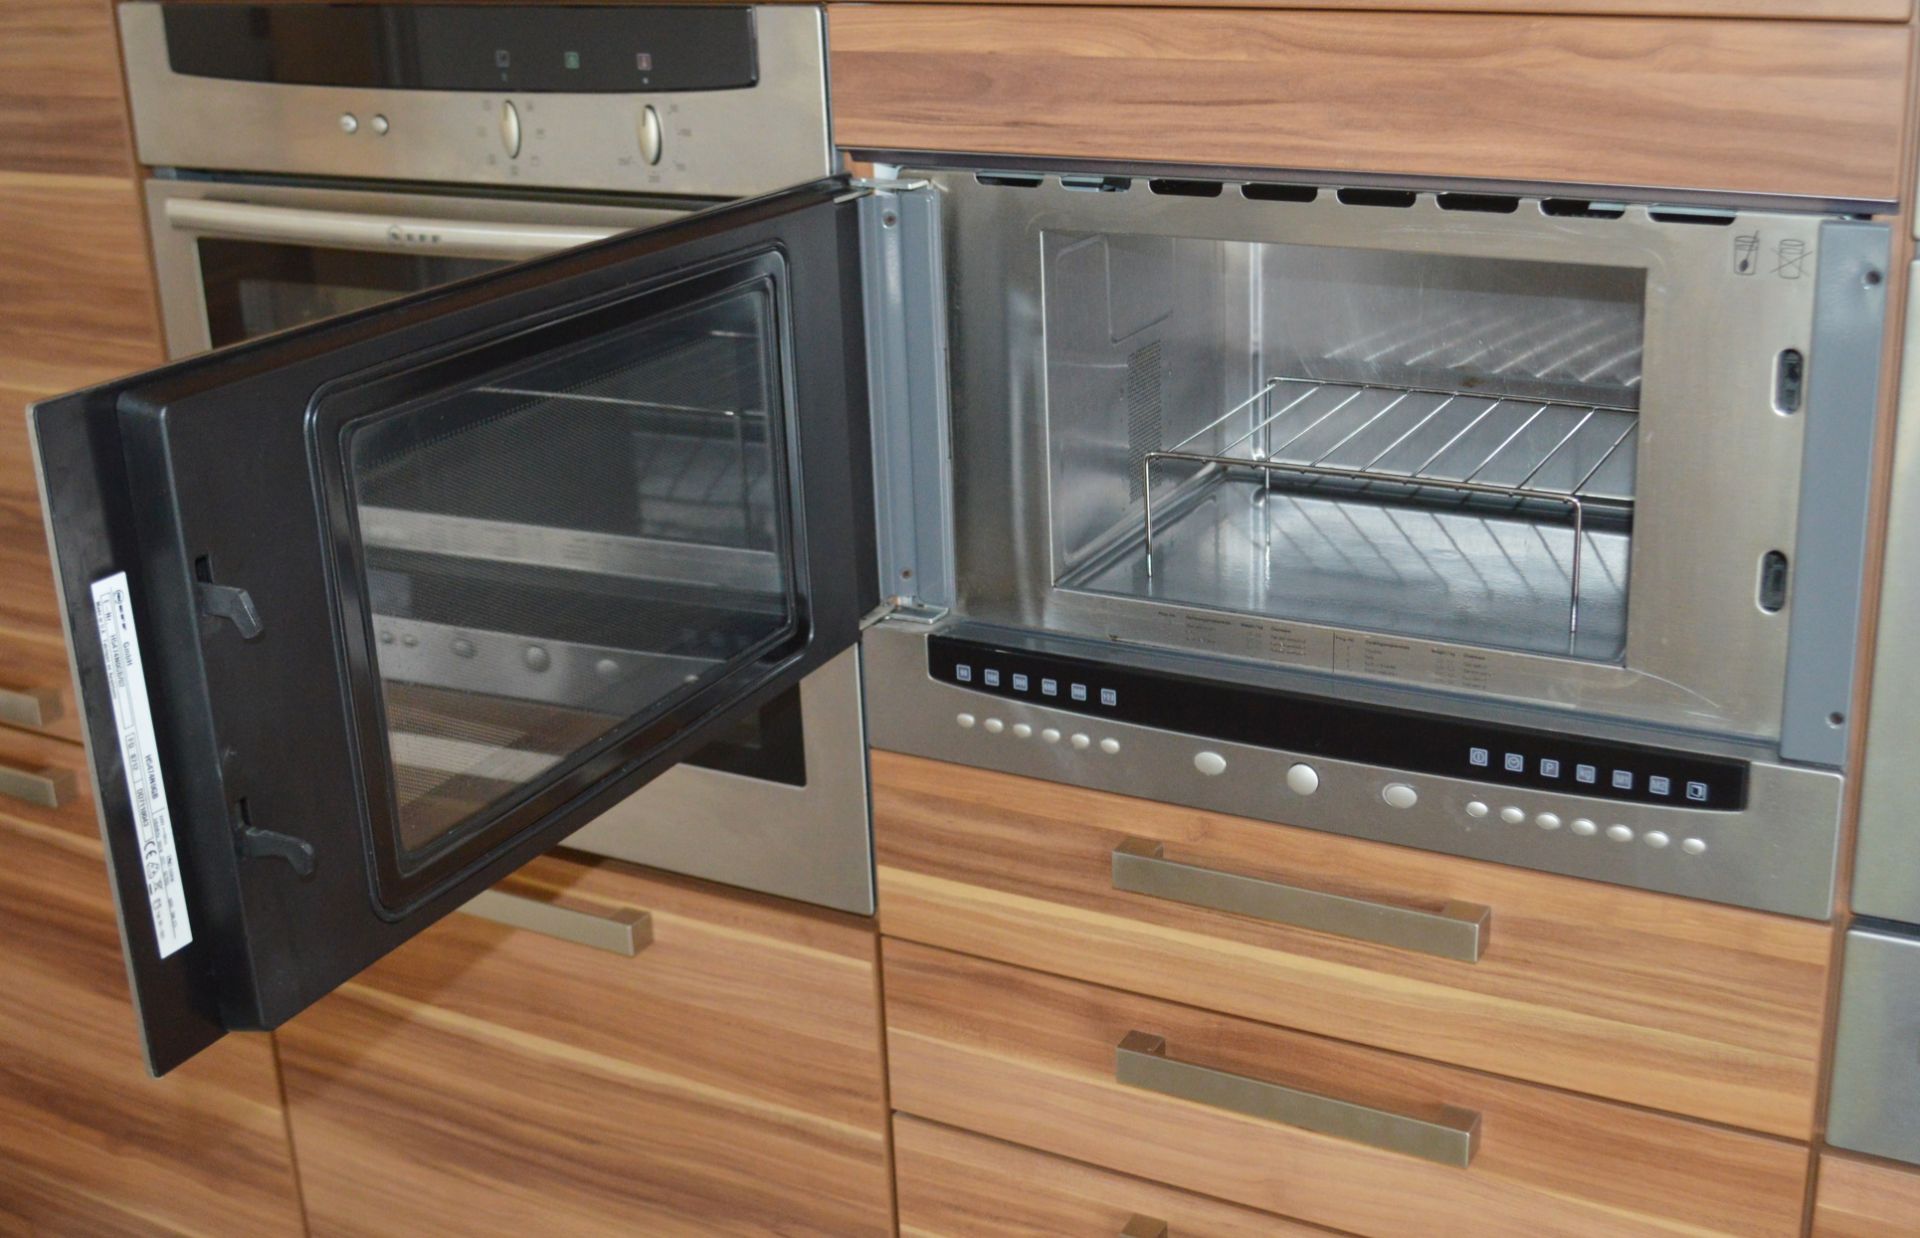 1 x Contemporary Bespoke Fitted Kitchen With Neff Branded Appliances - Collection Date: 1st November - Image 44 of 52